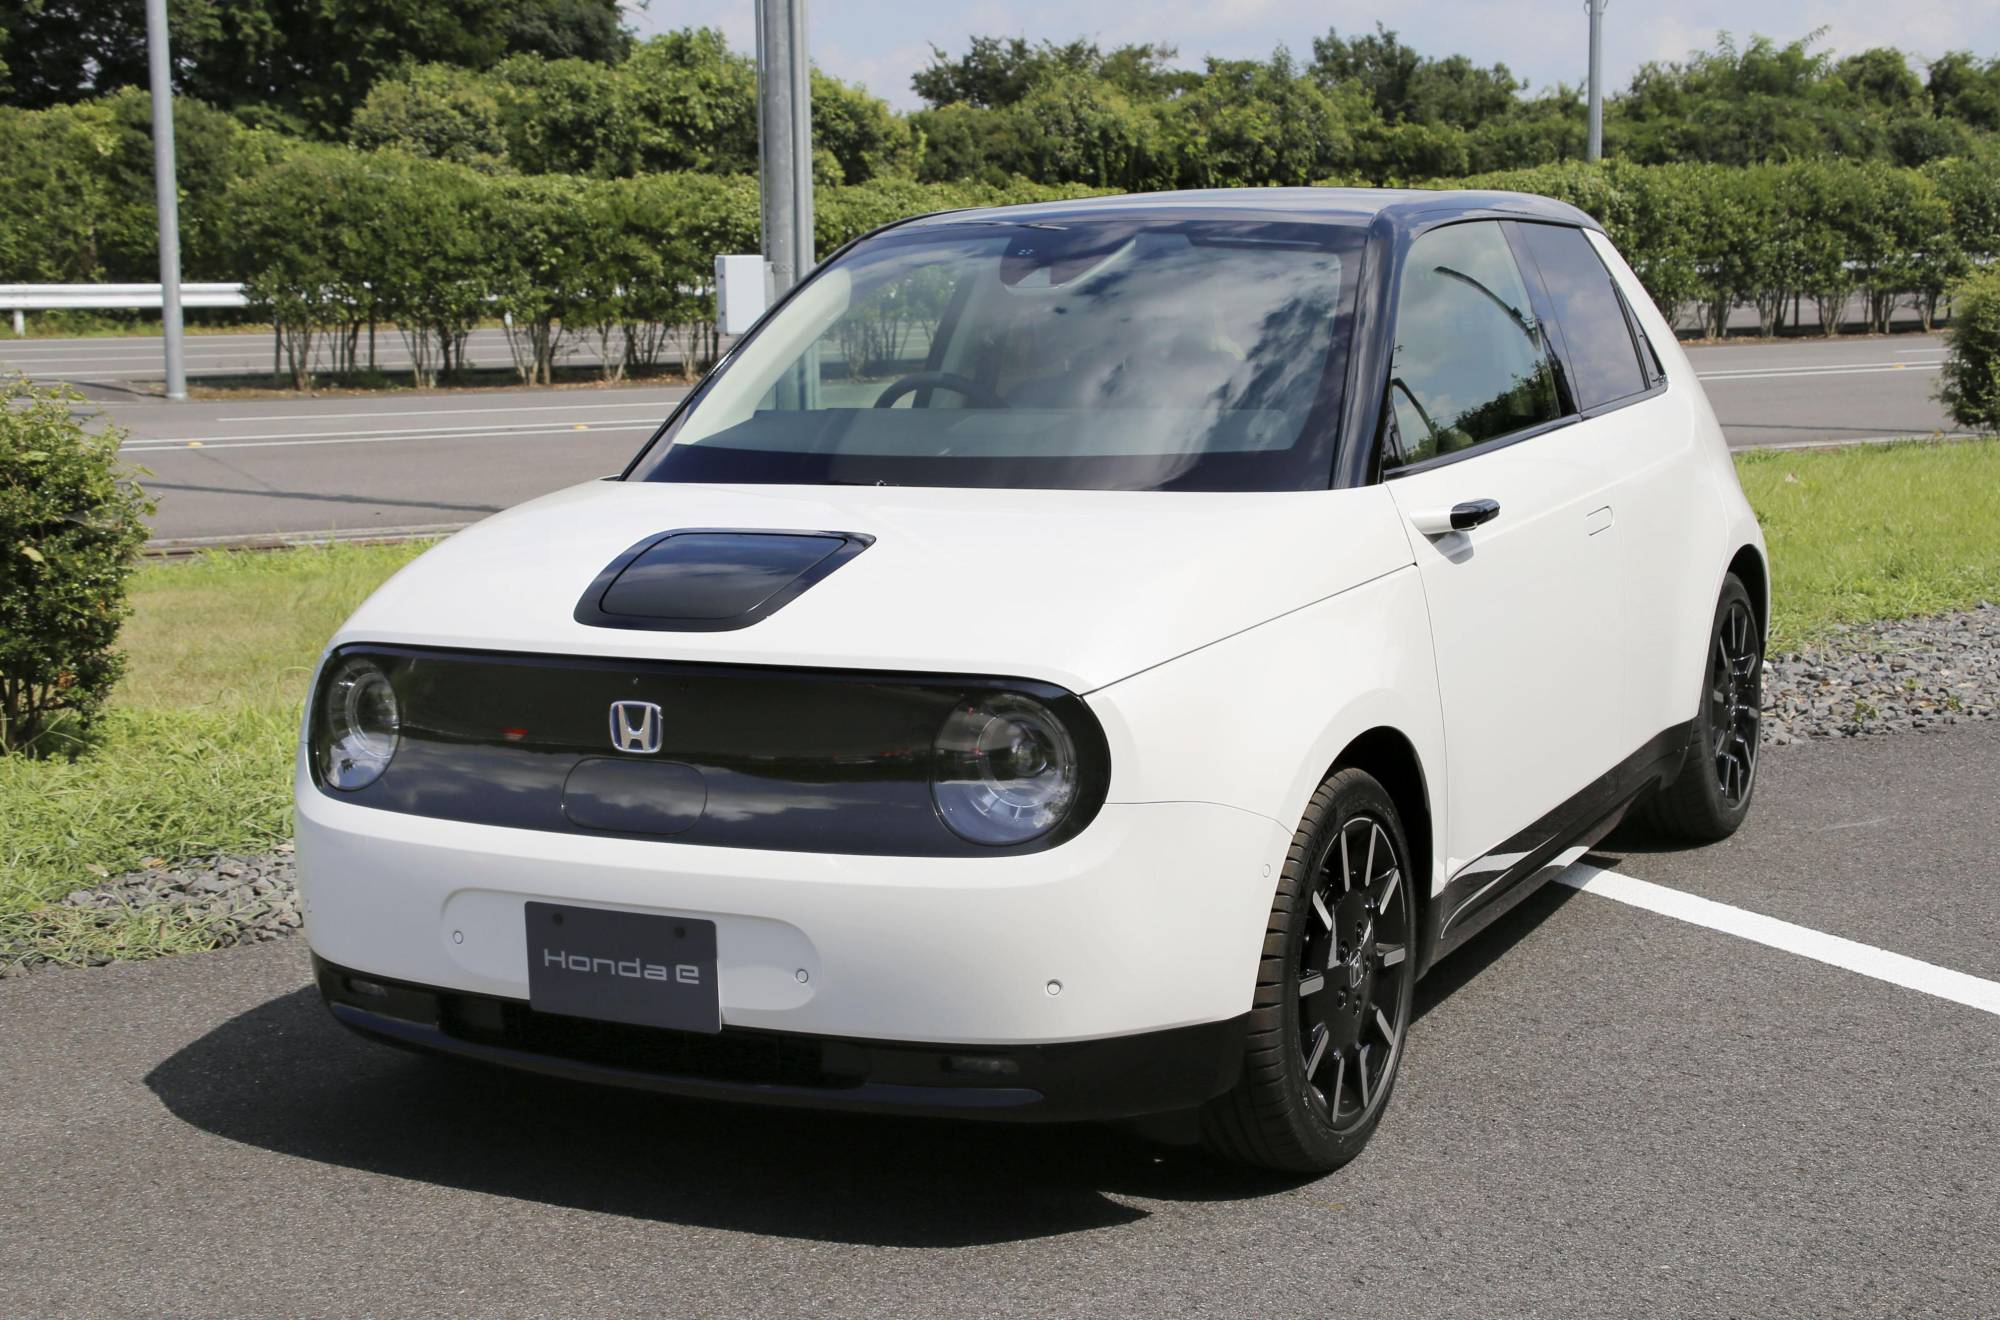 Honda's electric car in Japan's Automotive Industry